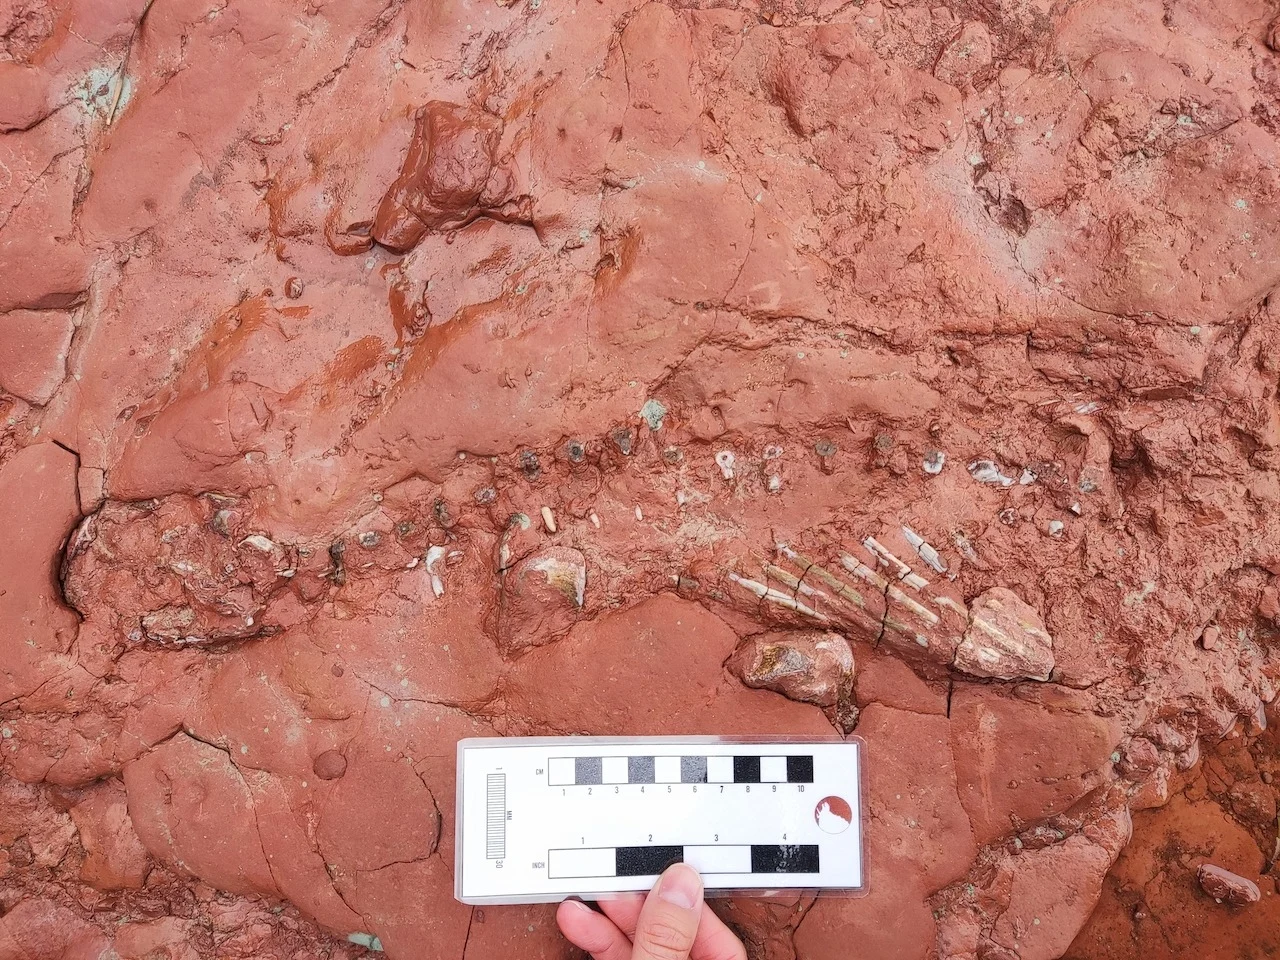 School teacher stumbles upon fossil that may be 300 million years old